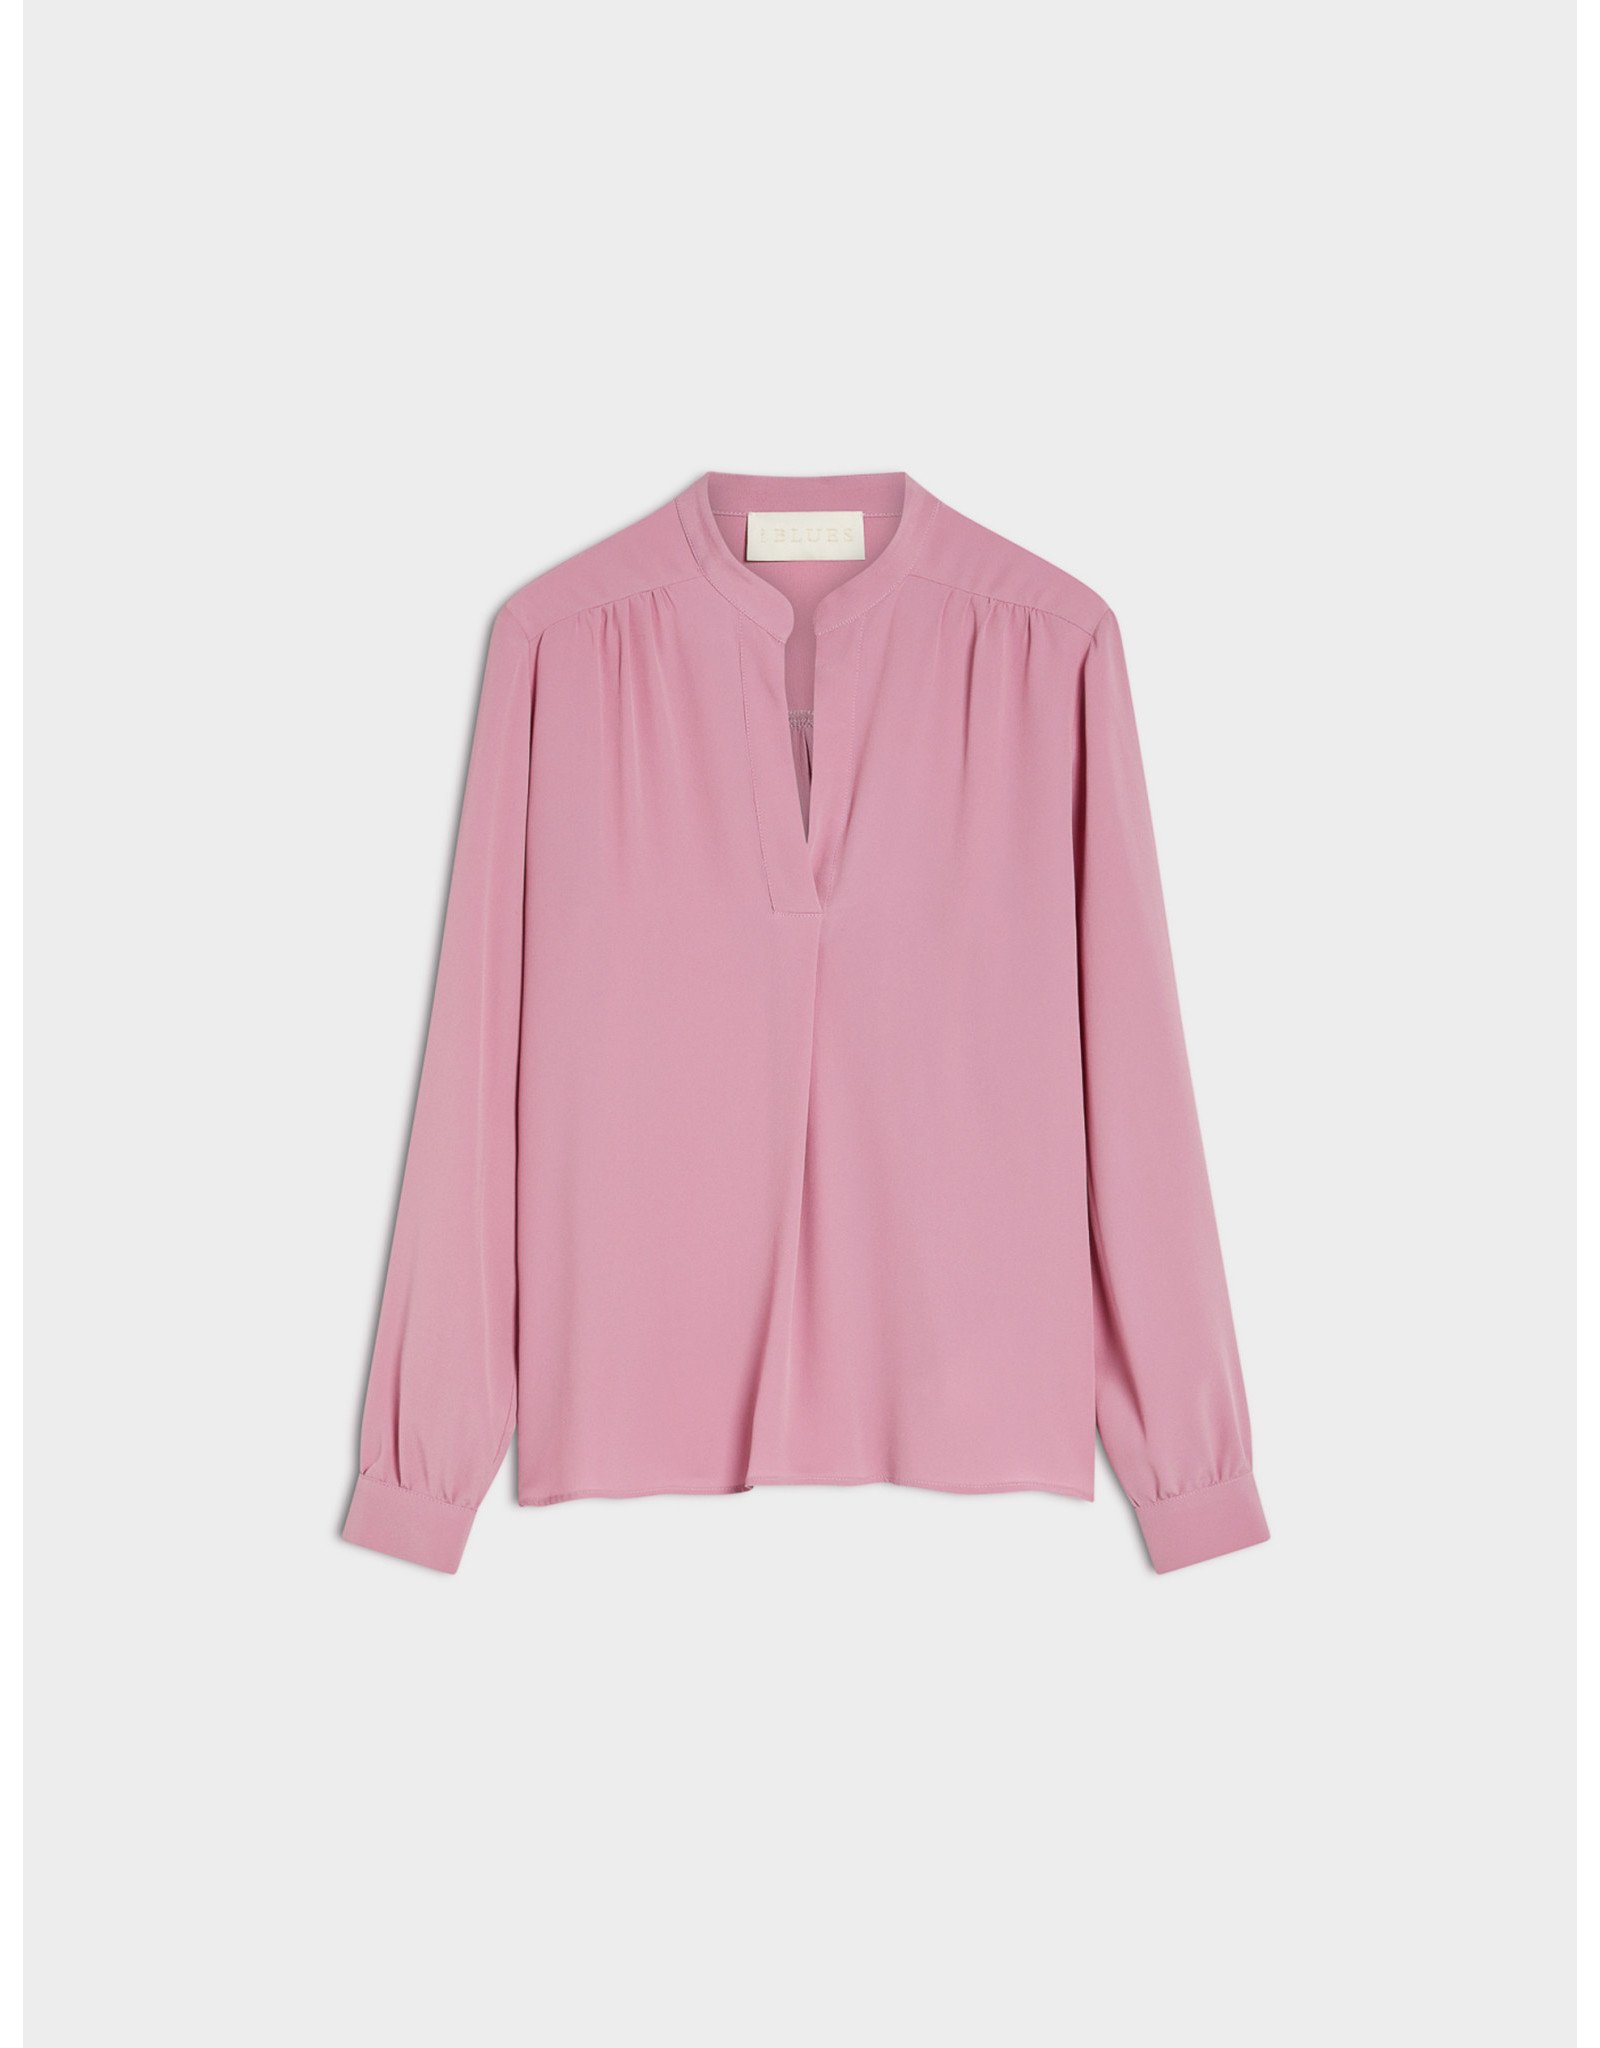 i Blues Liutaio Pink Top